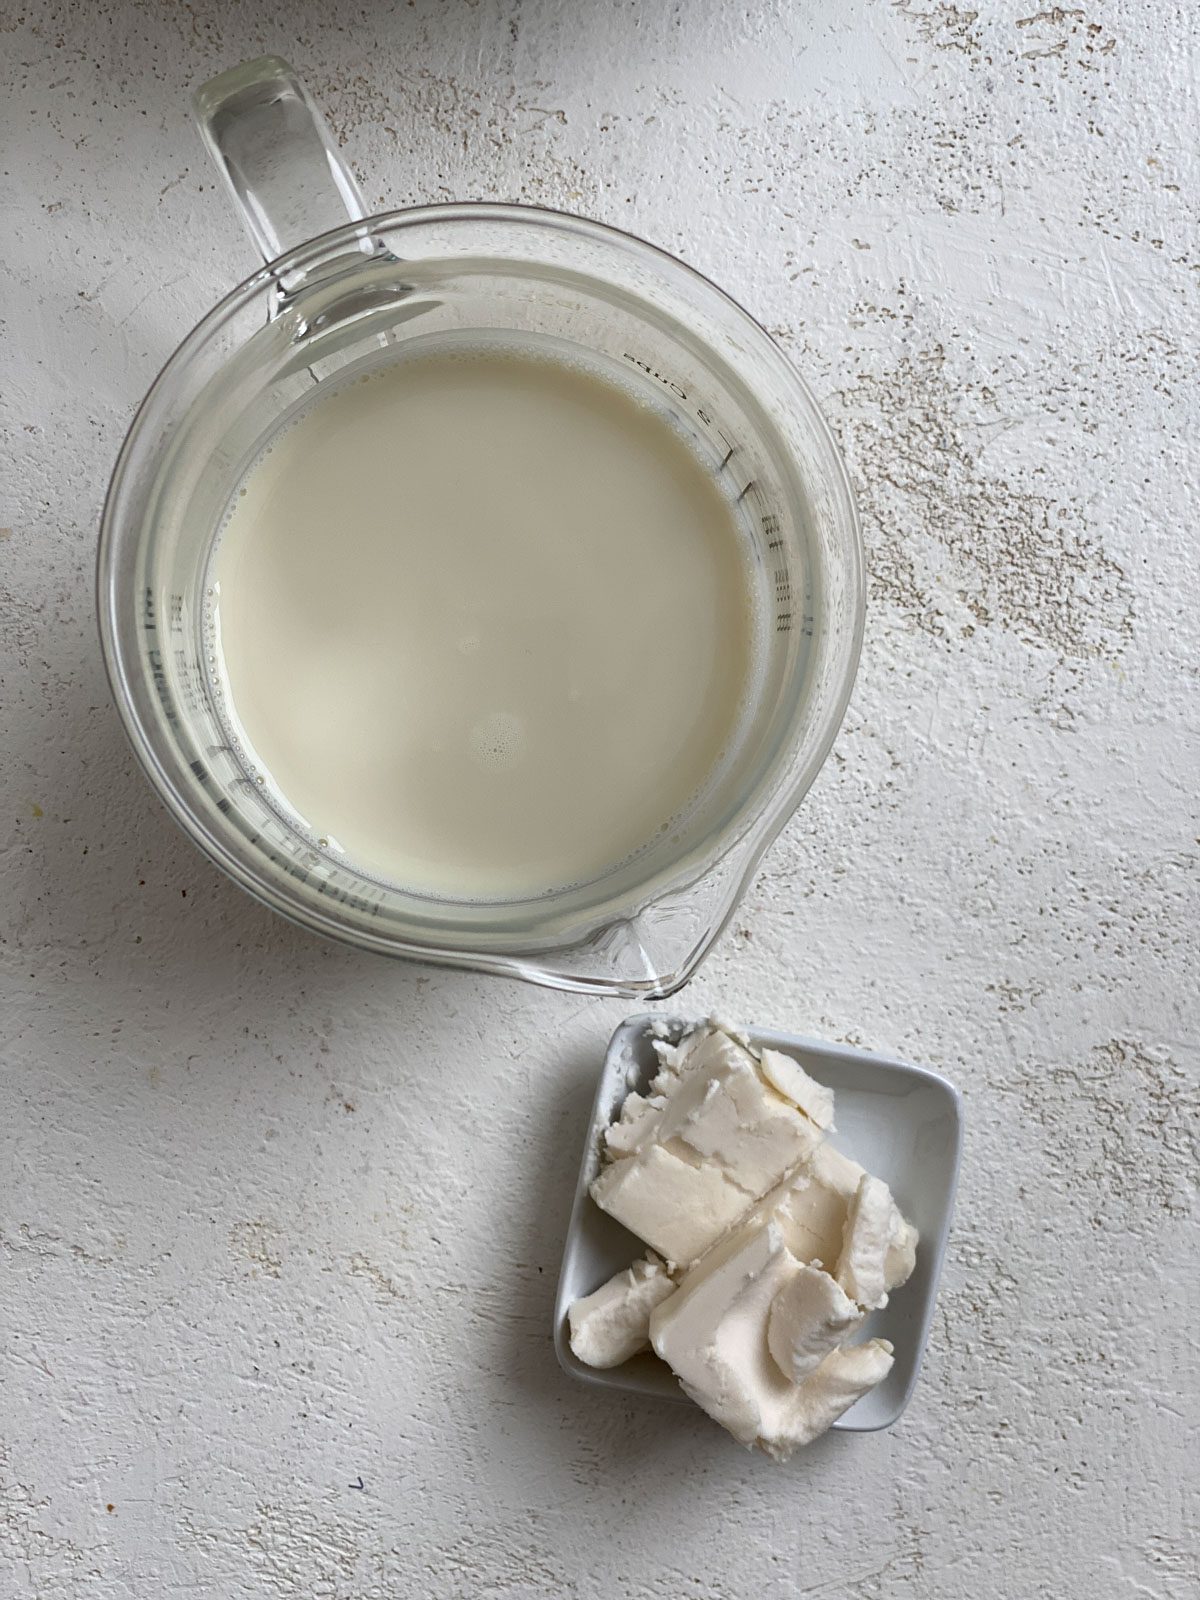 cup of plant-based milk alongside plant butter against a white surface